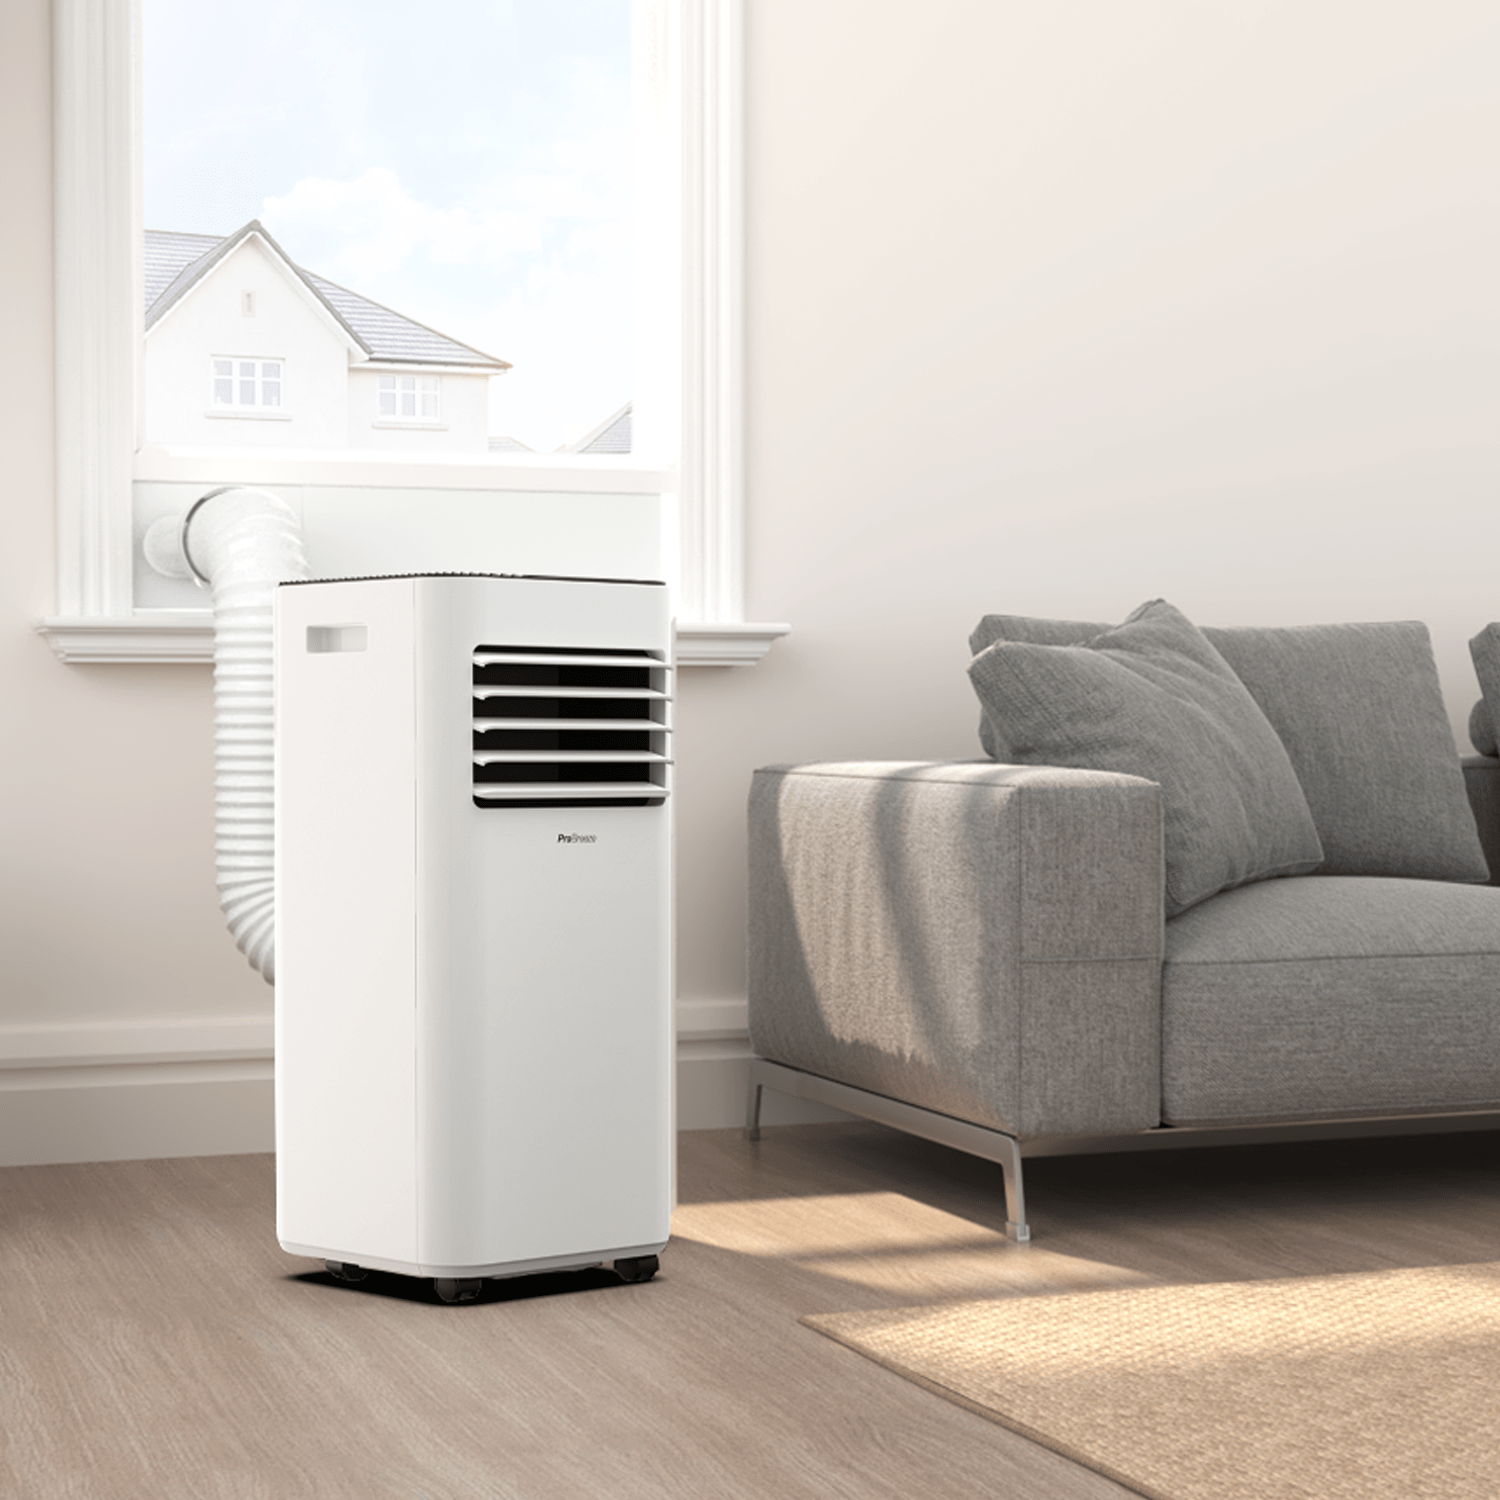 7000 BTU 4-in-1 Portable Air Conditioner with Dehumidification Function